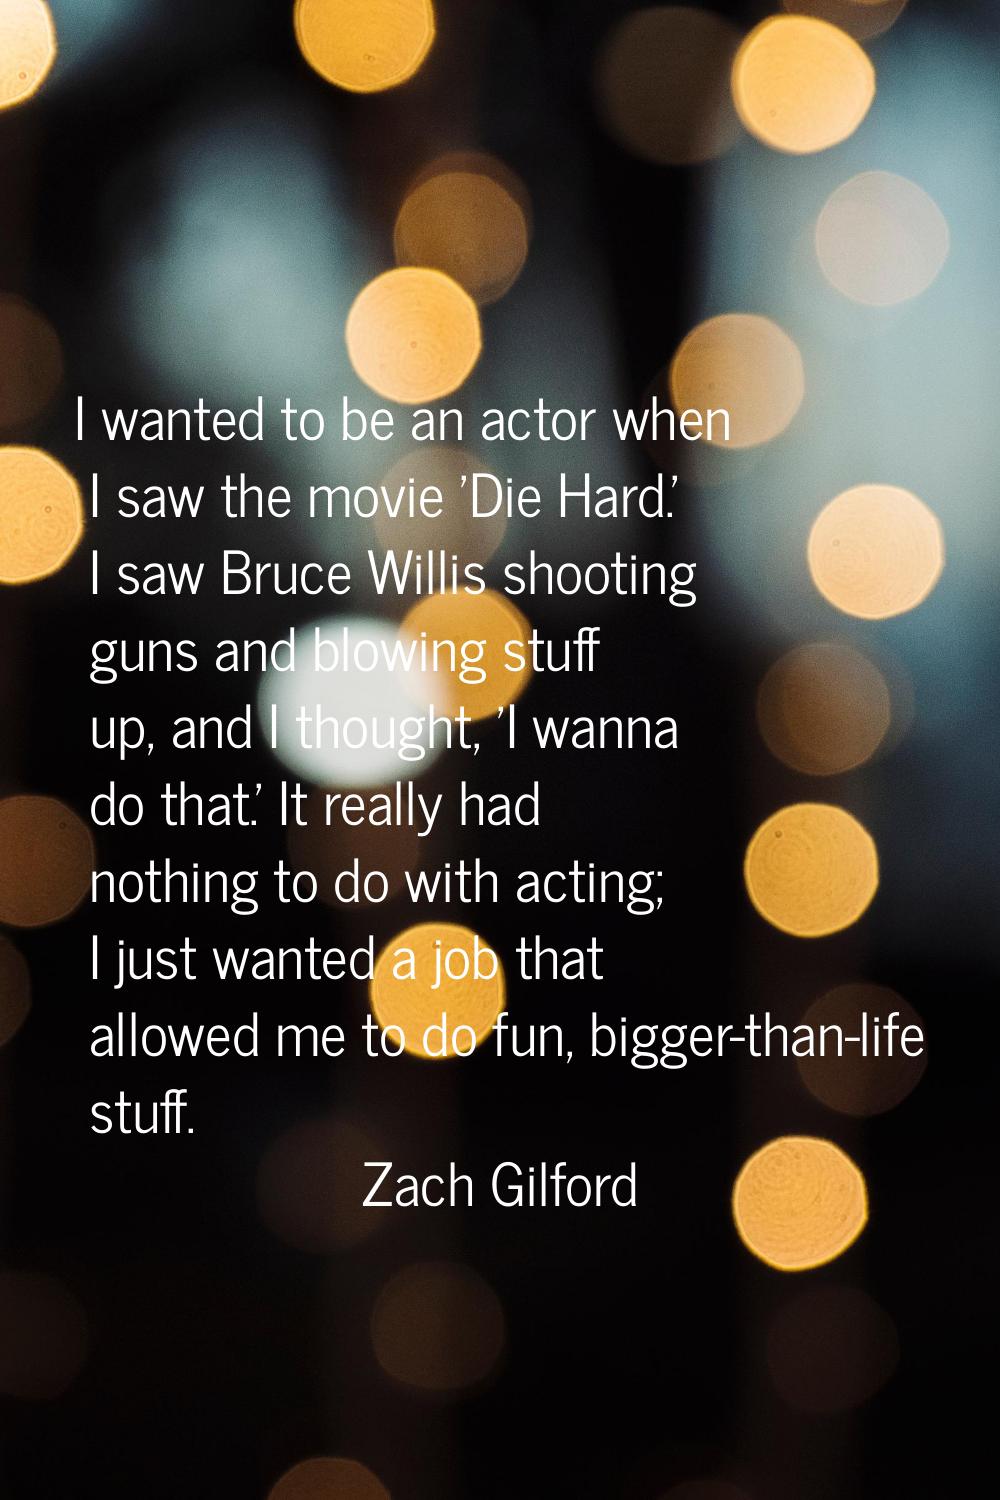 I wanted to be an actor when I saw the movie 'Die Hard.' I saw Bruce Willis shooting guns and blowi